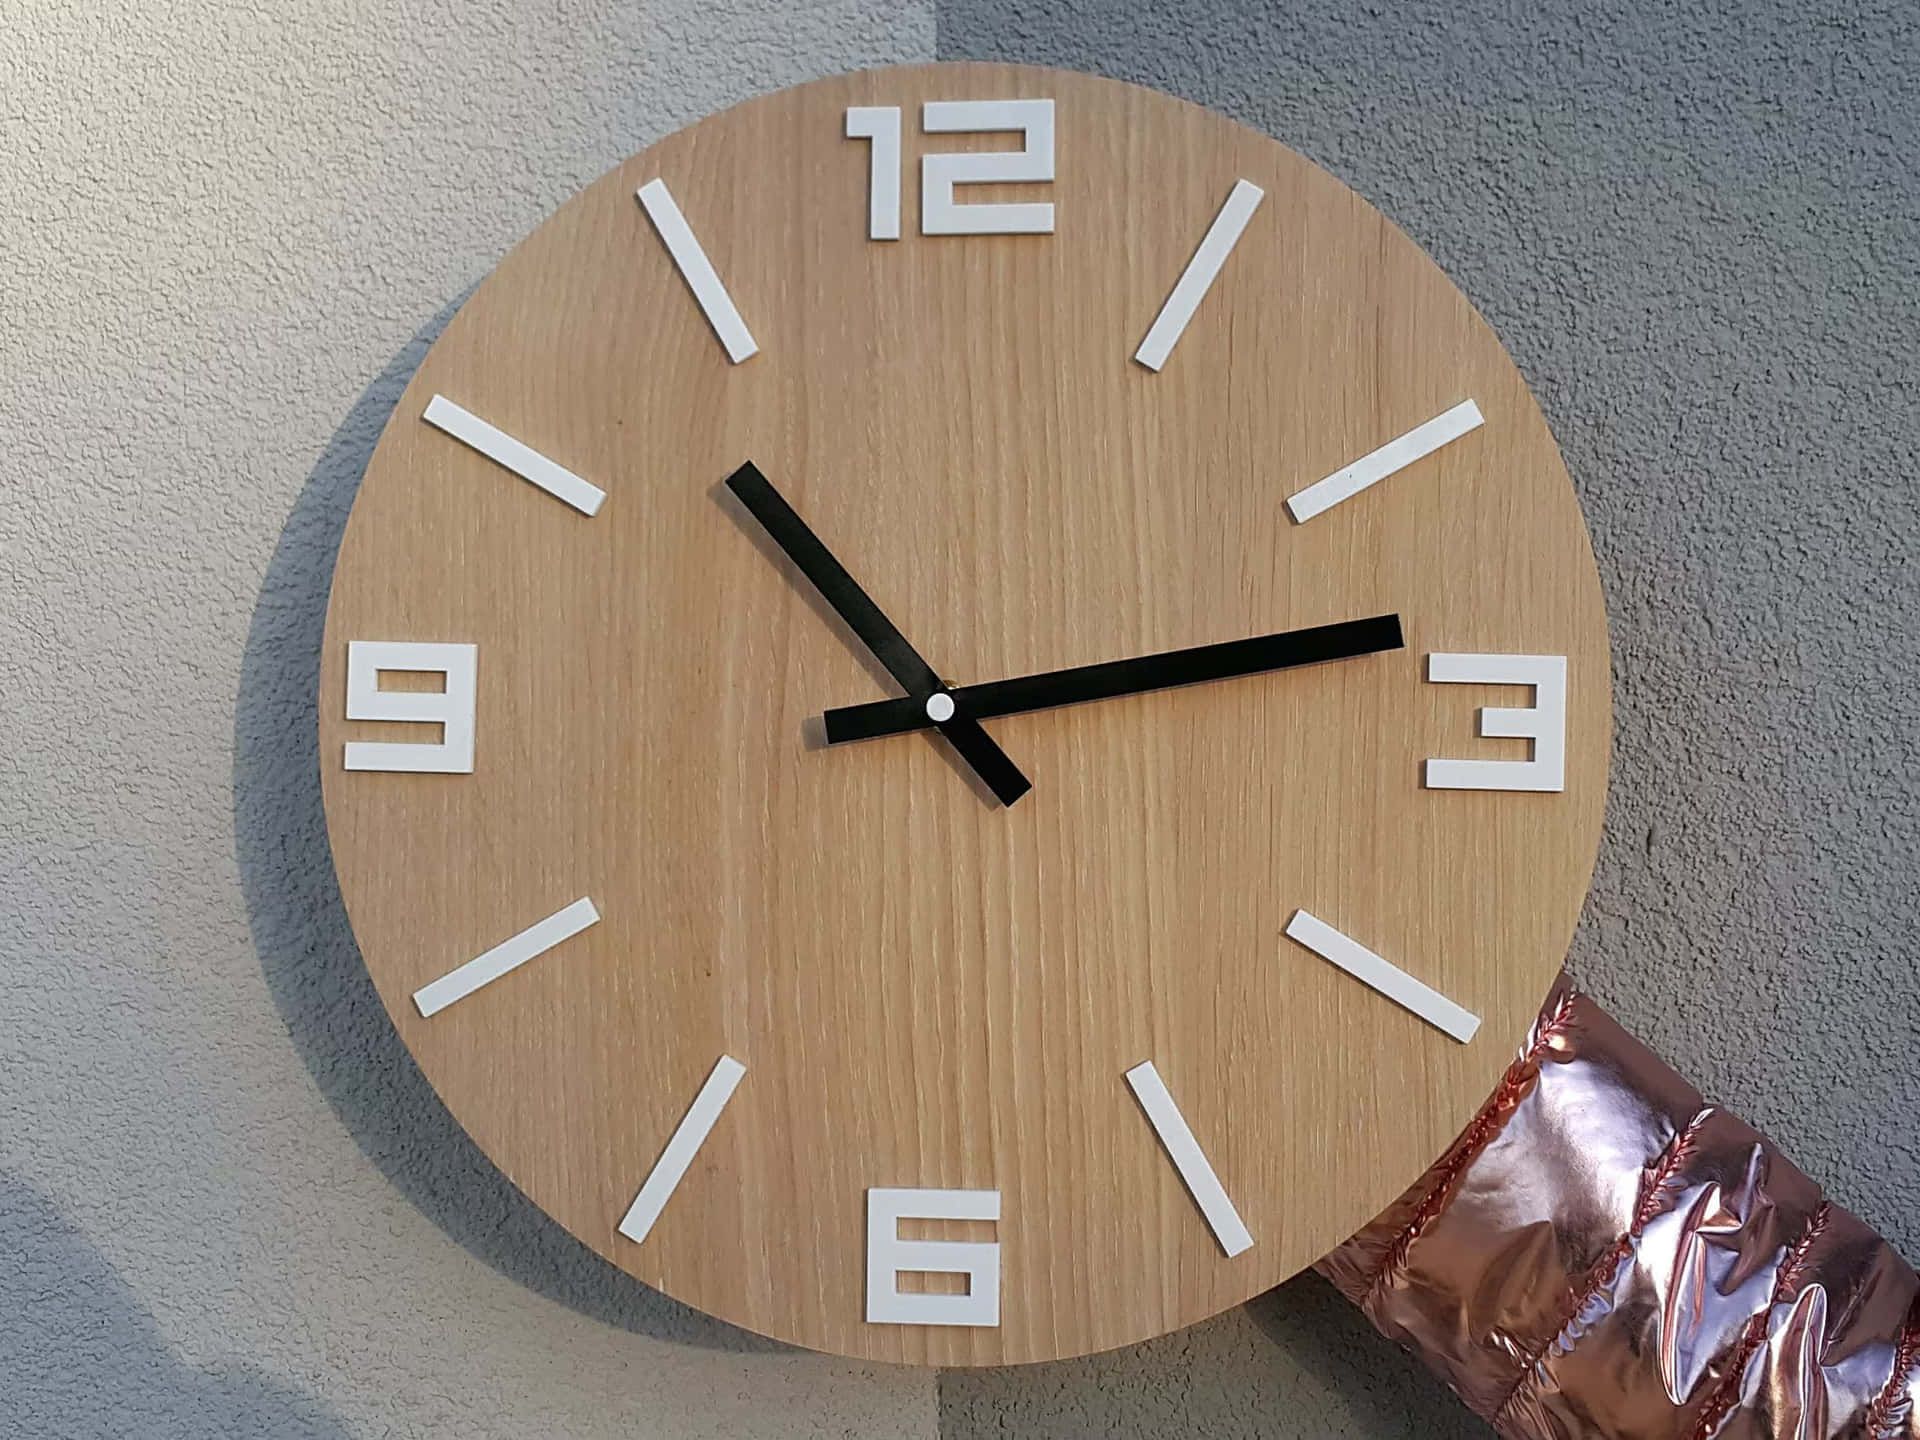 Showing the time aesthetically with modern wall clock